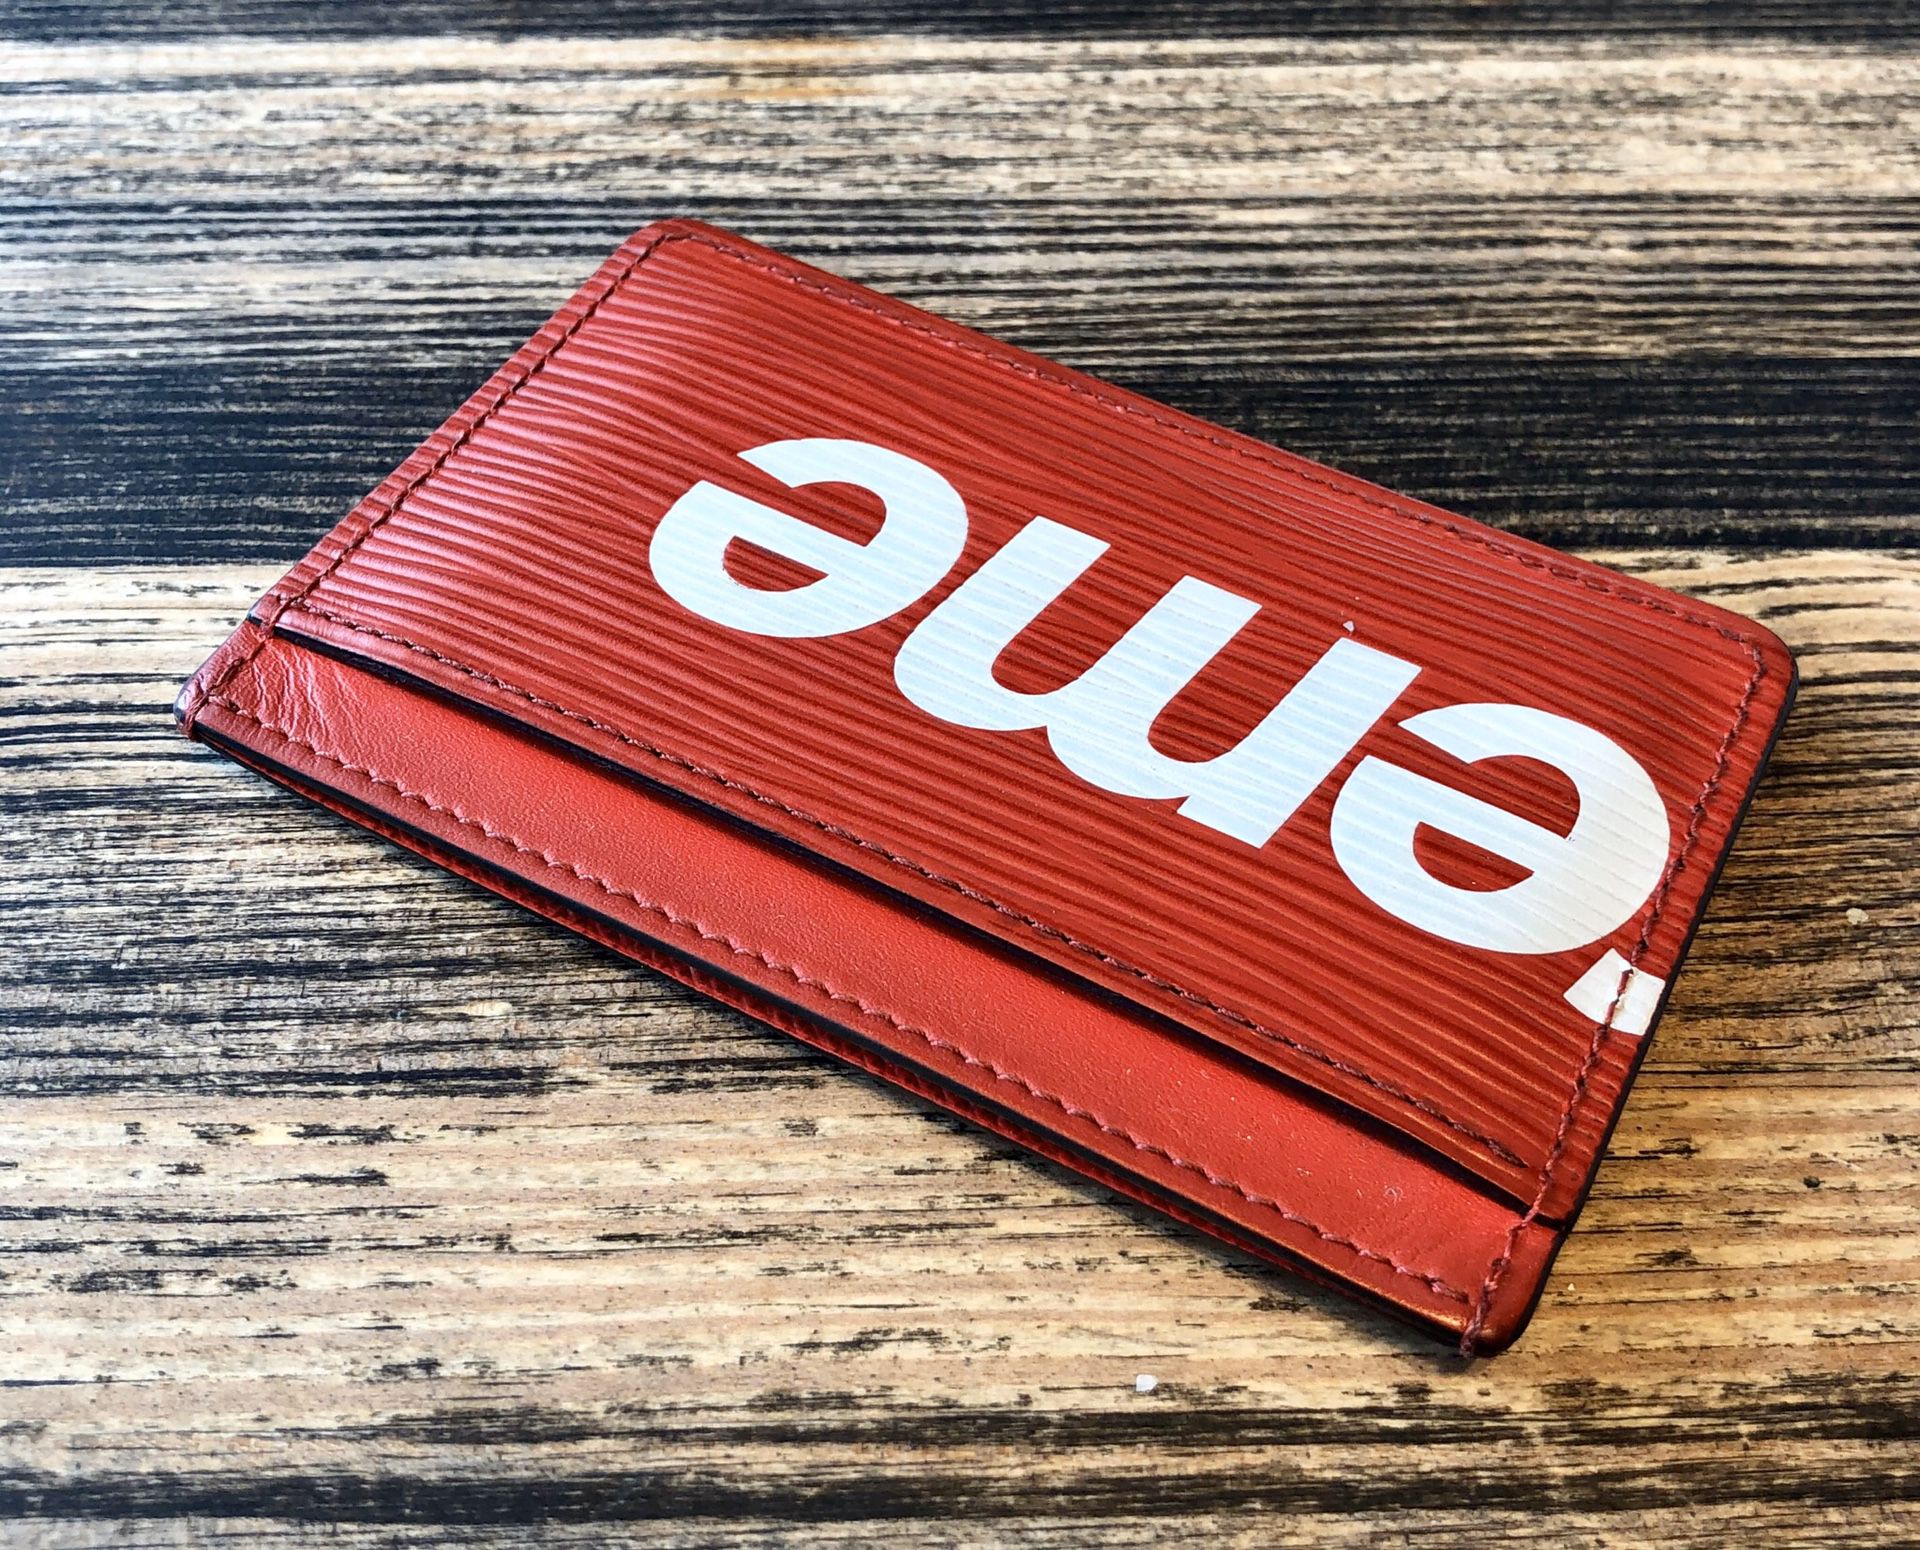 Supreme Lv Red Wallet With Box & Bag for Sale in Leesburg, FL - OfferUp